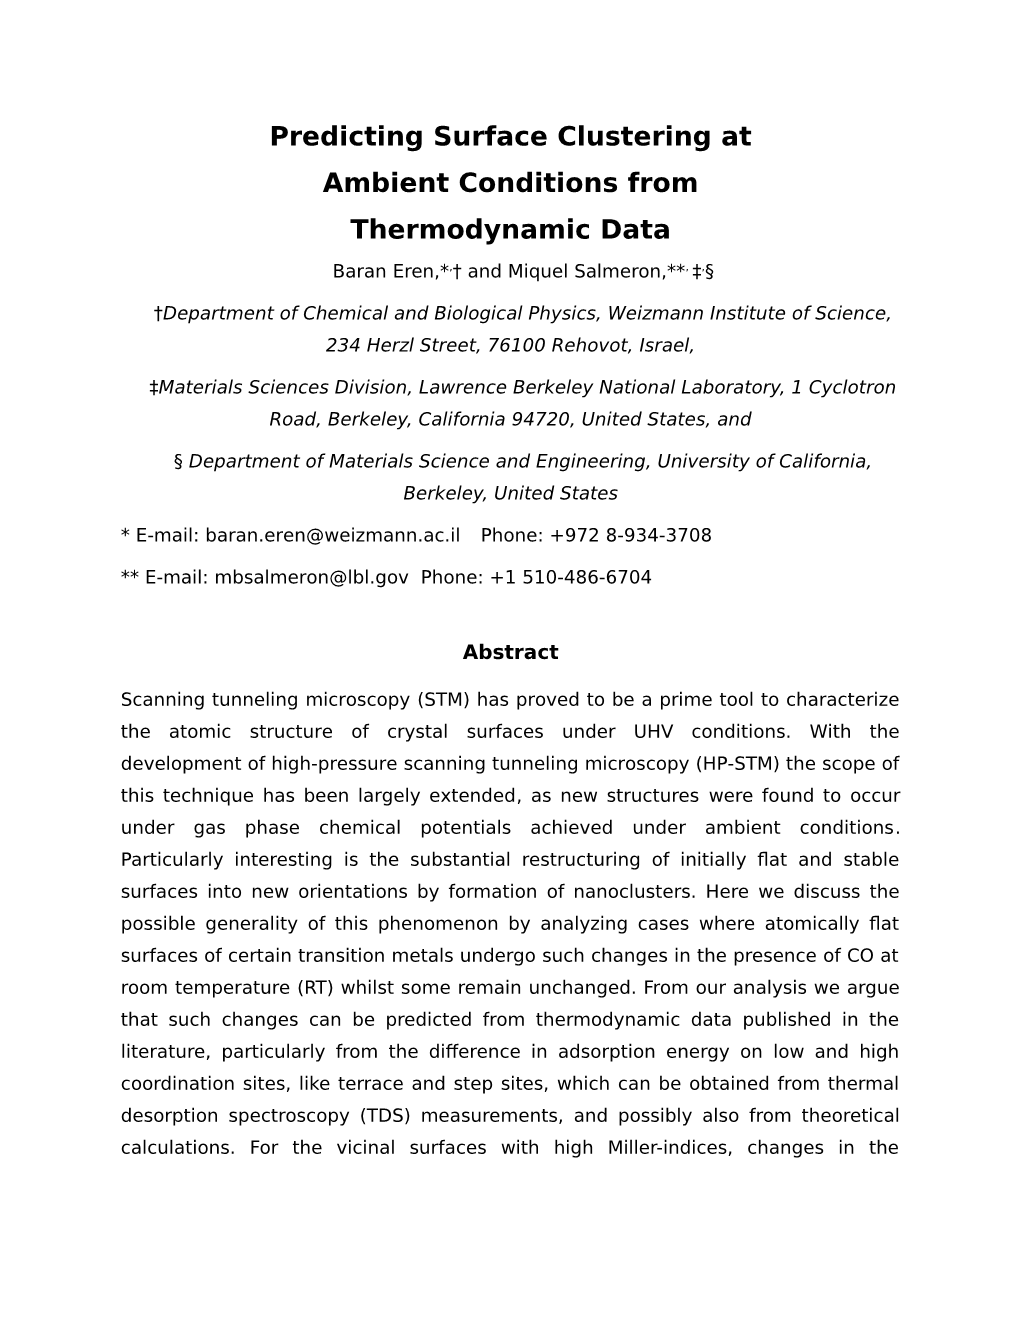 Predicting Surface Clustering at Ambient Conditions from Thermodynamic Data